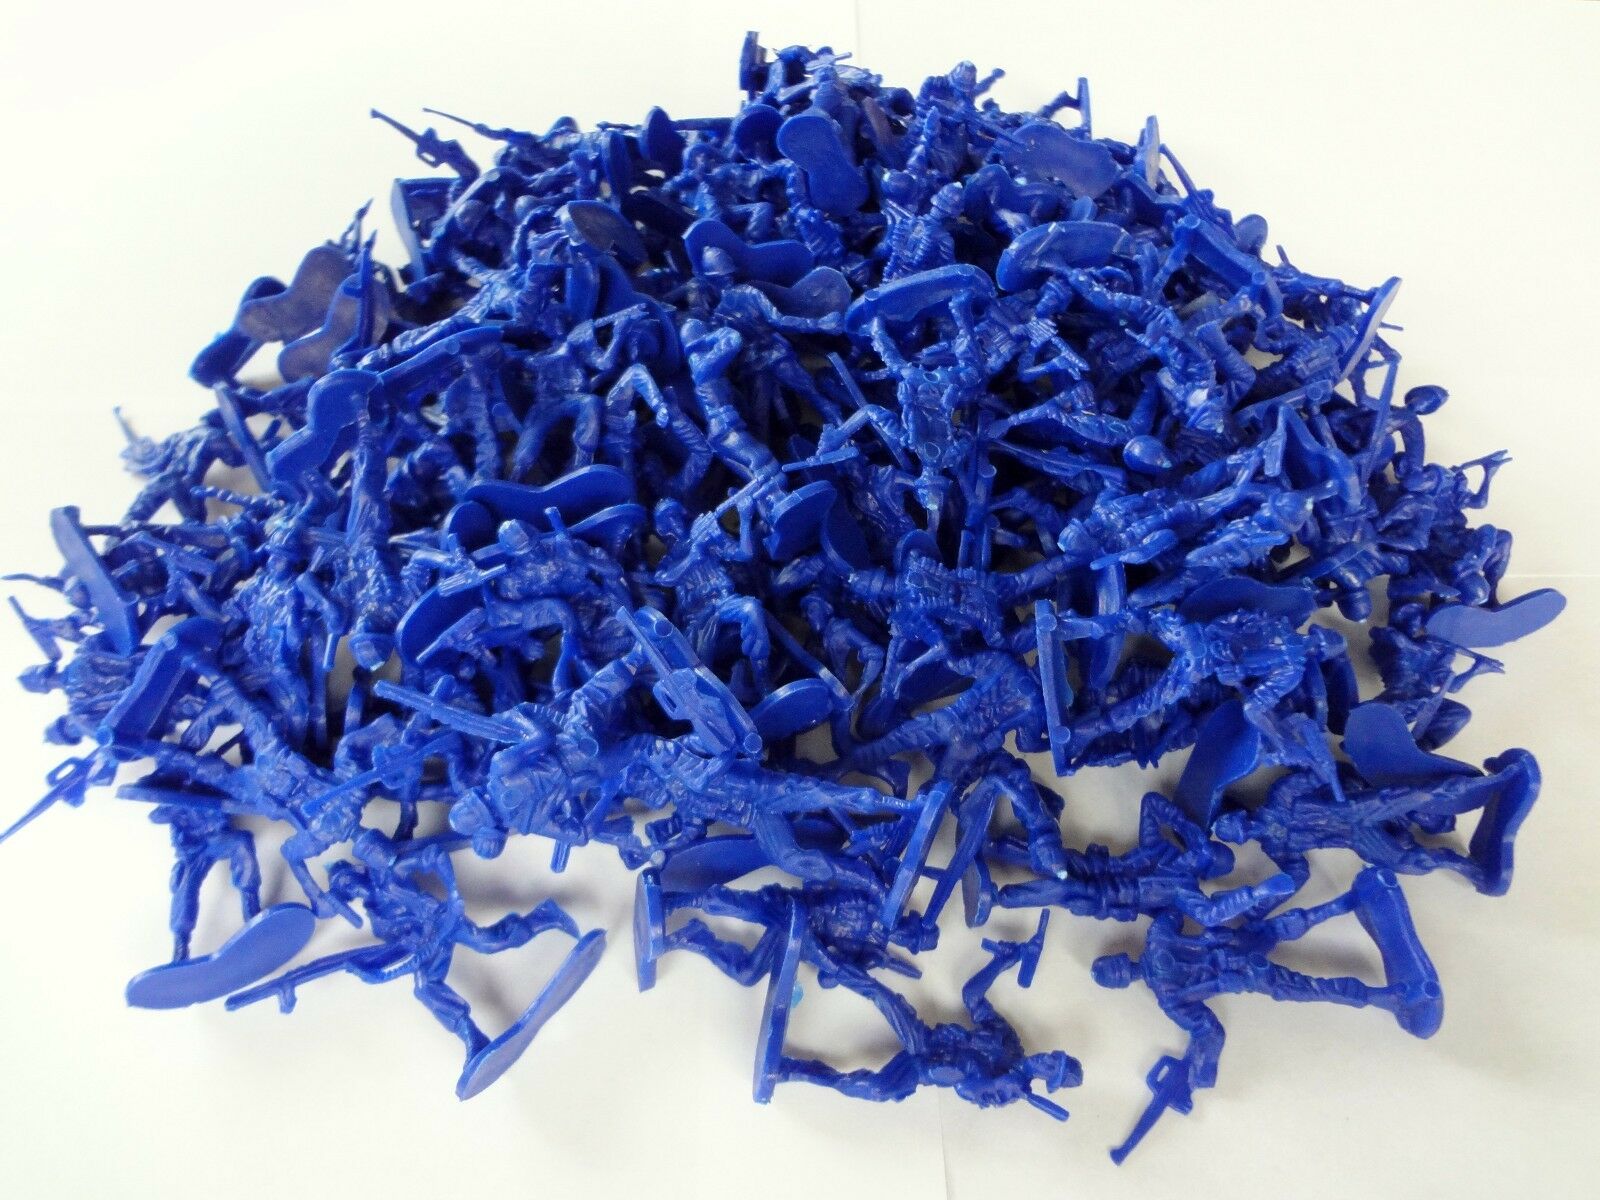 Lot Of 144 Blue Plastic Army Men 1 3/4" Inch Bulk Action Figures Toy Soldiers